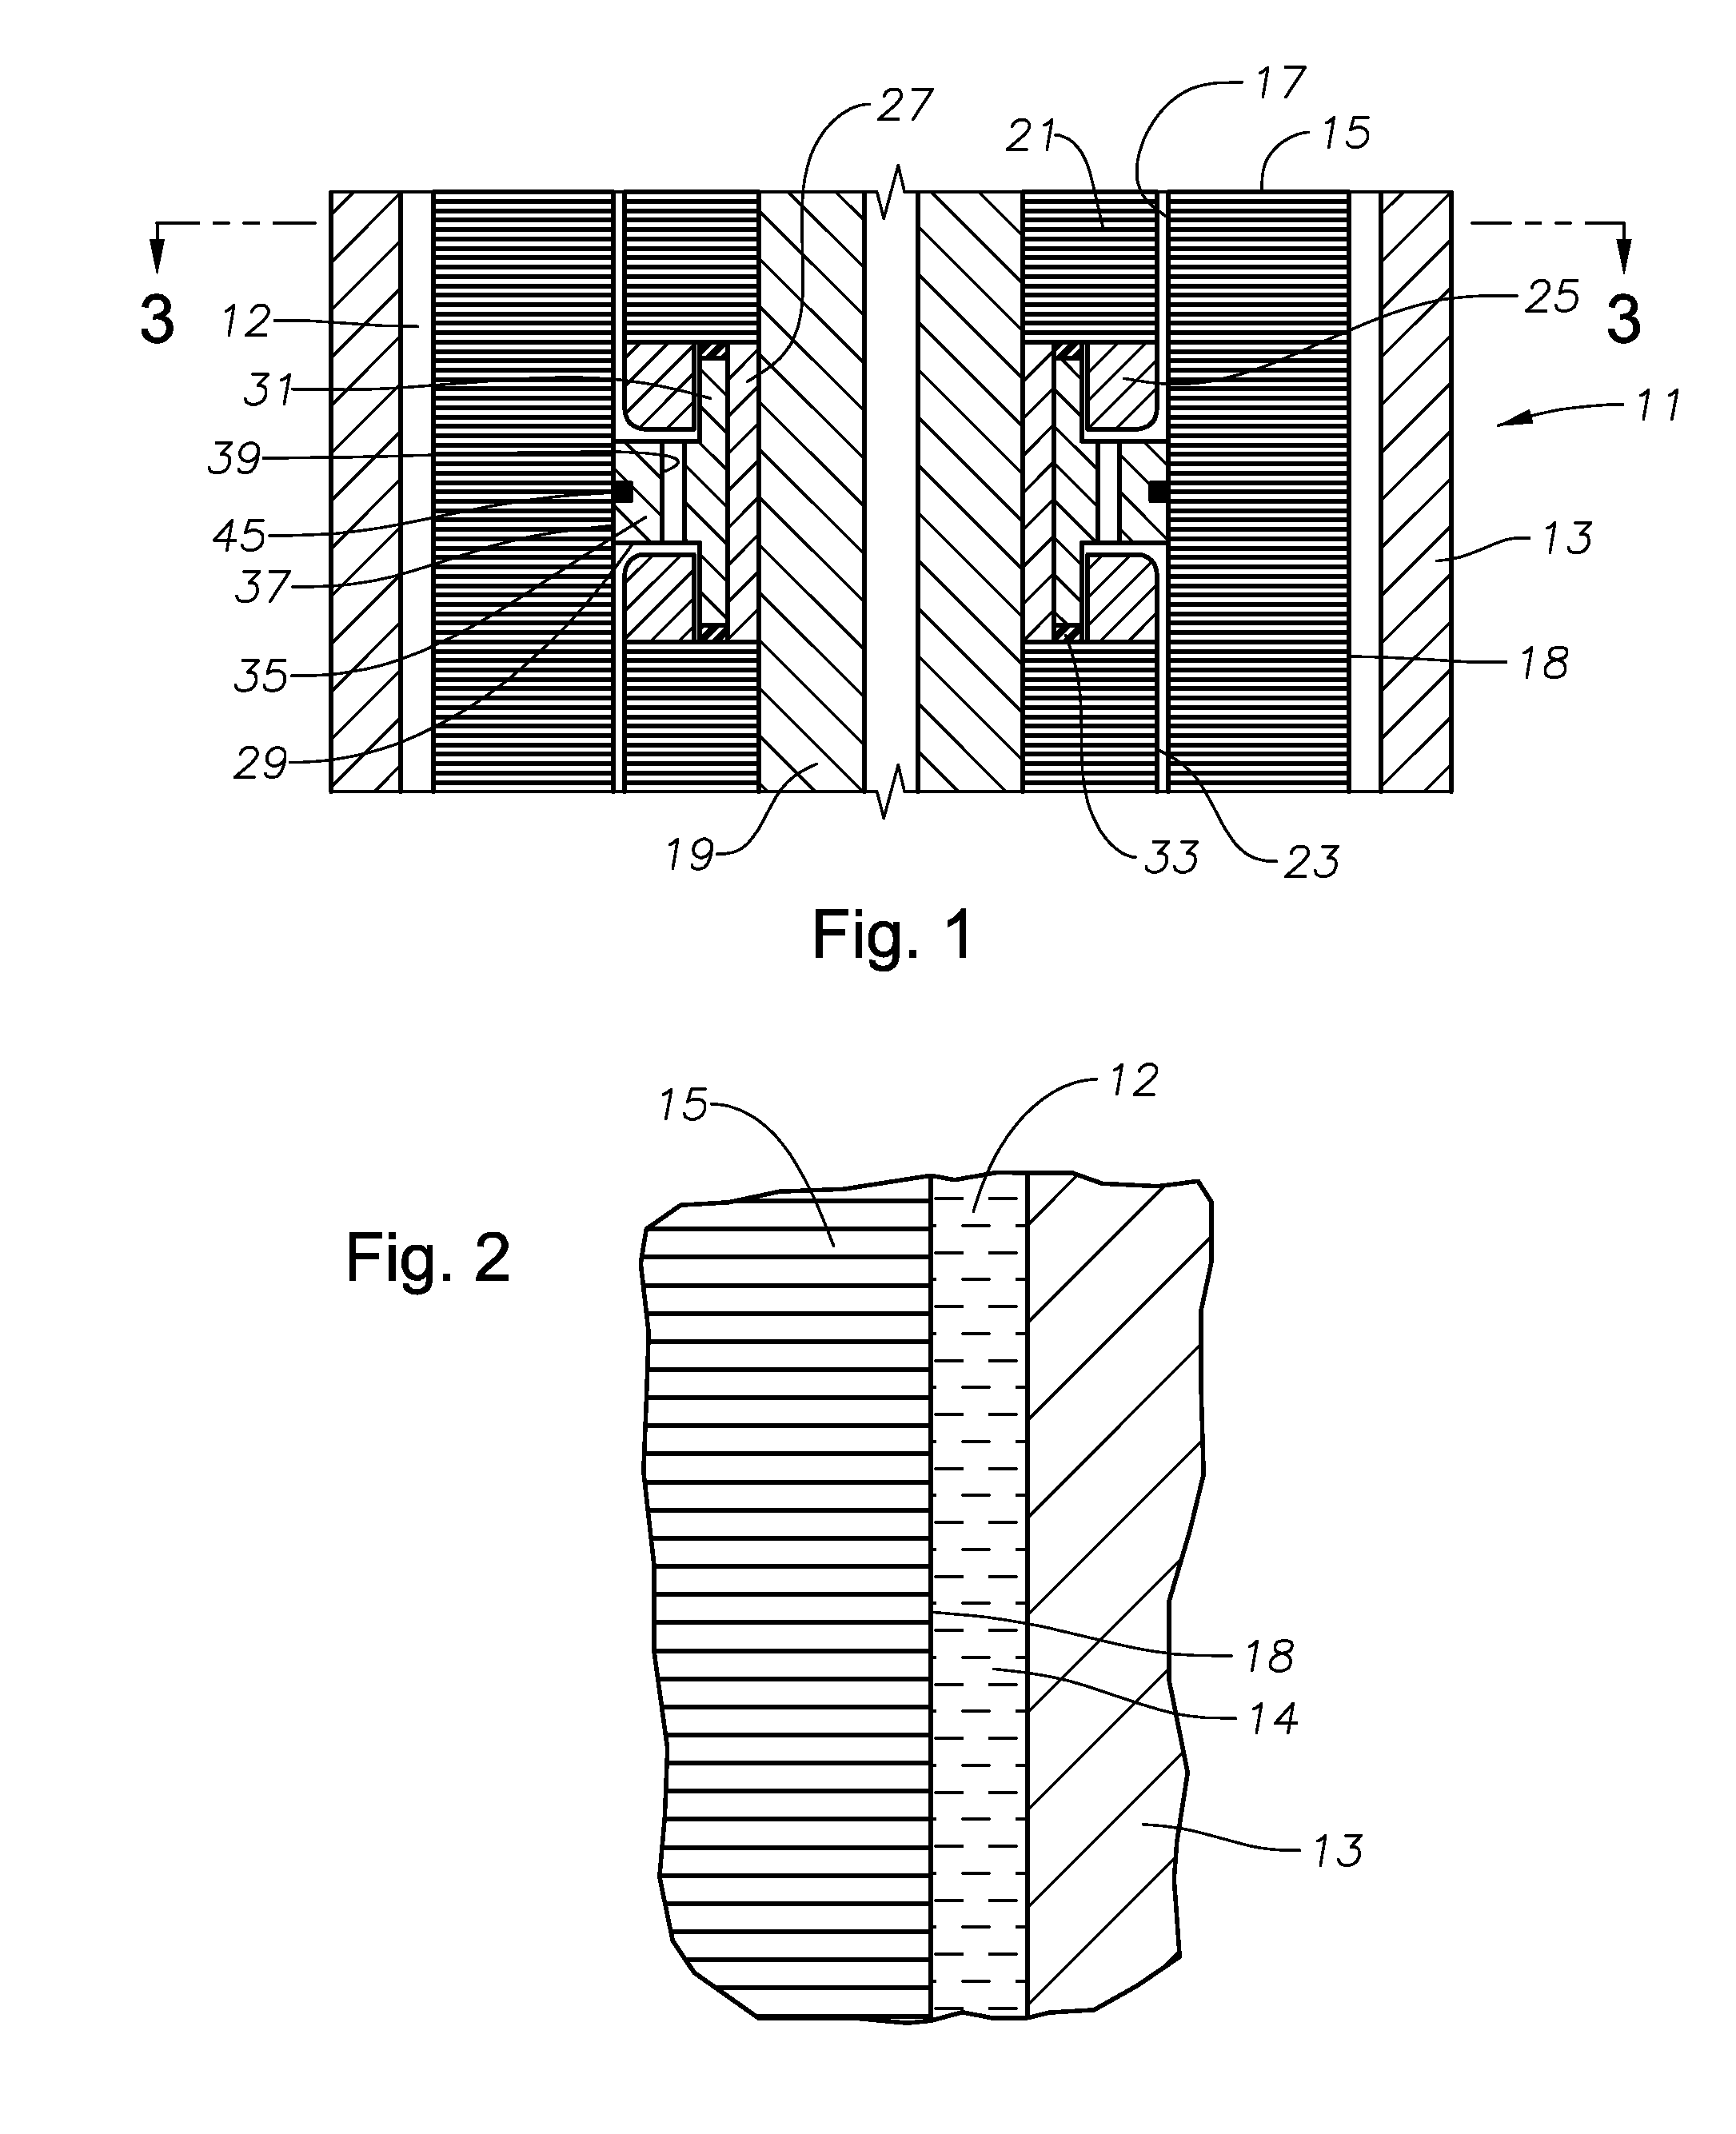 Enhanced thermal conductivity material in annular gap between electrical motor stator and housing